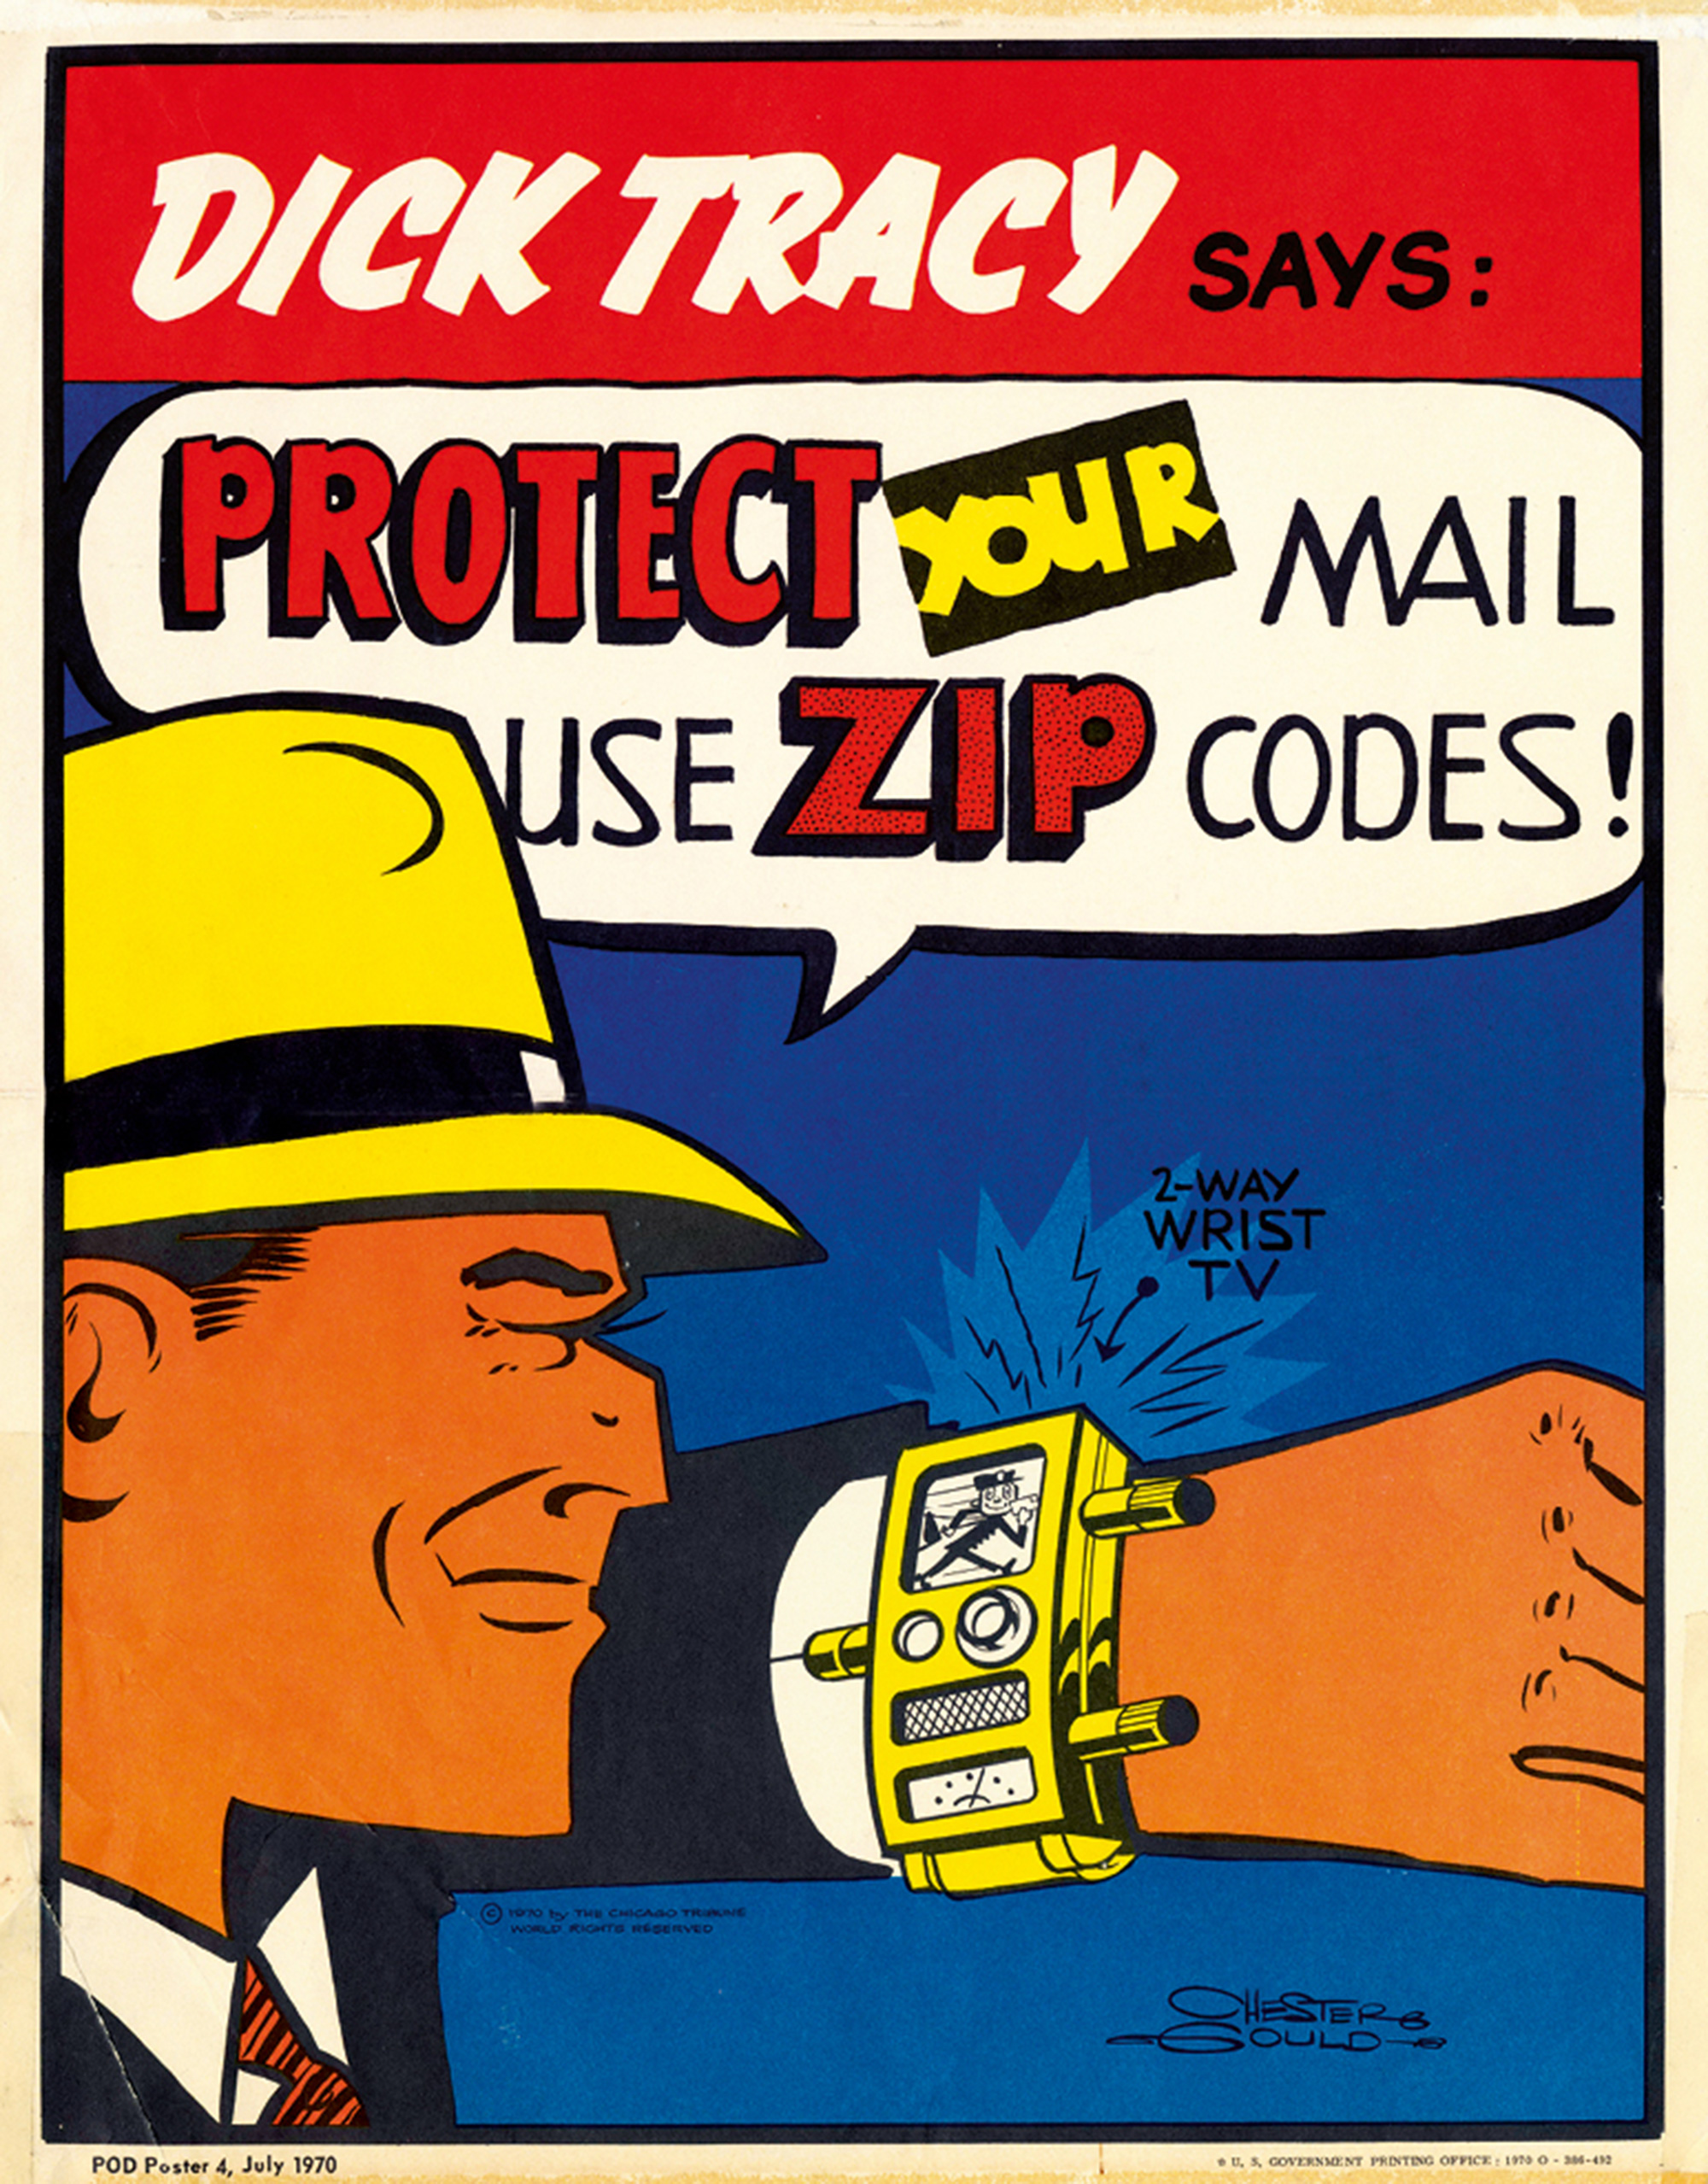 A nineteen seventy poster promoting the use of zip codes. Here Mr. Zip appears on Dick Tracy’s famous 2-Way Wrist TV.